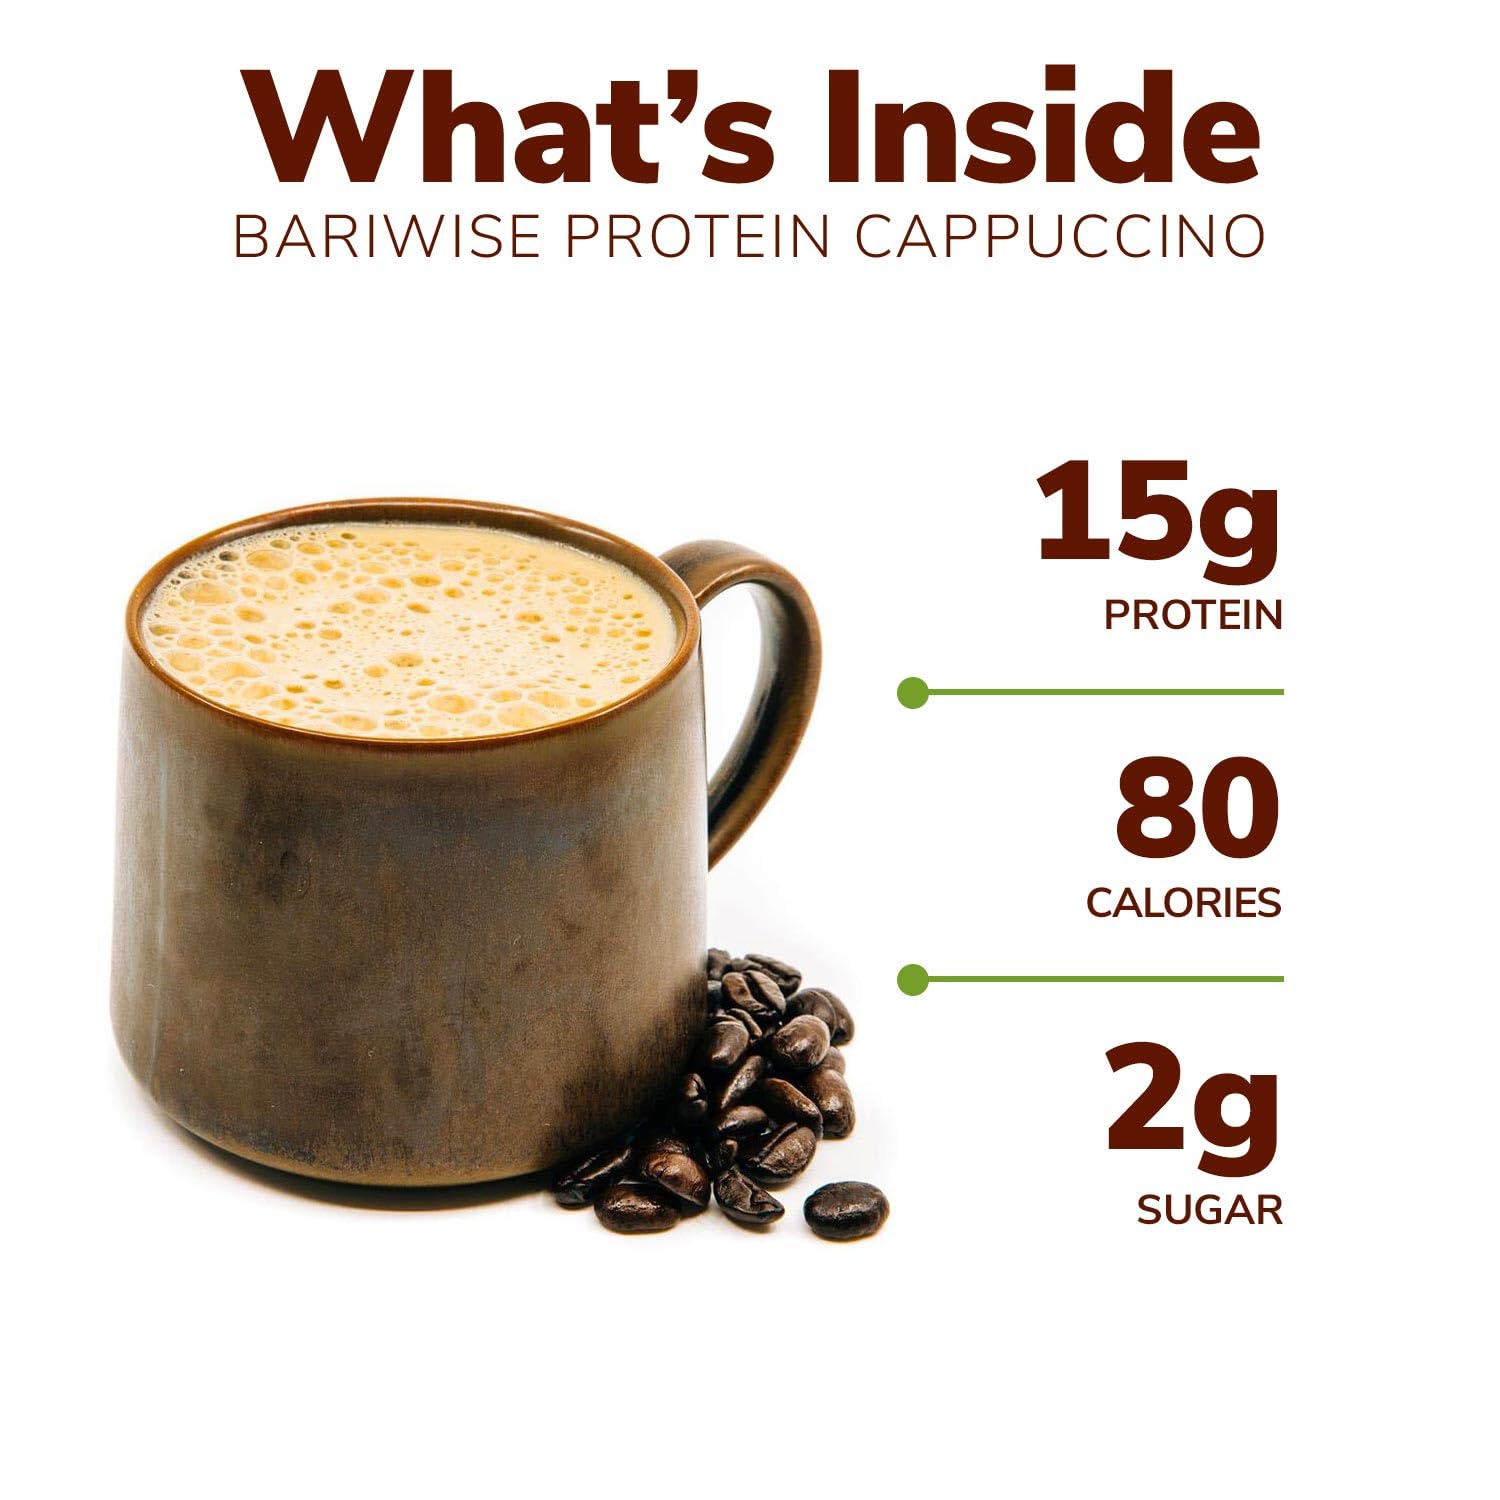 BariWise Protein Hot Drink Cappuccino Mix, Original, Low Sugar, Gluten Free, Keto Friendly & Low Carb (7ct)